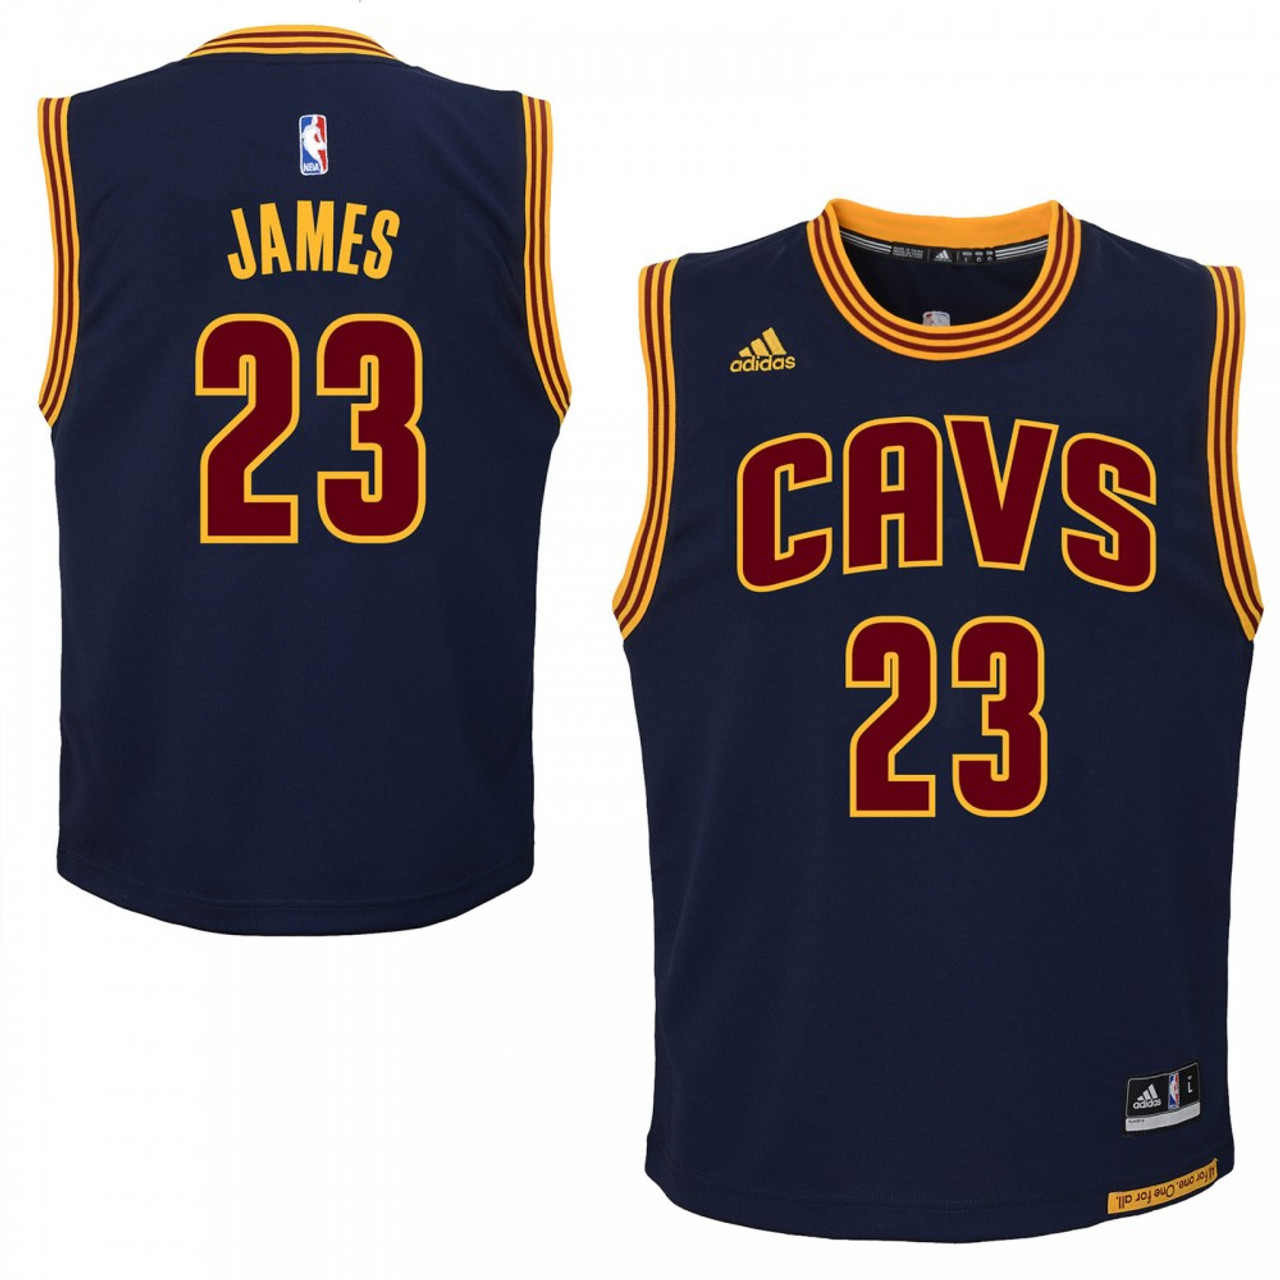 lebron james youth jersey